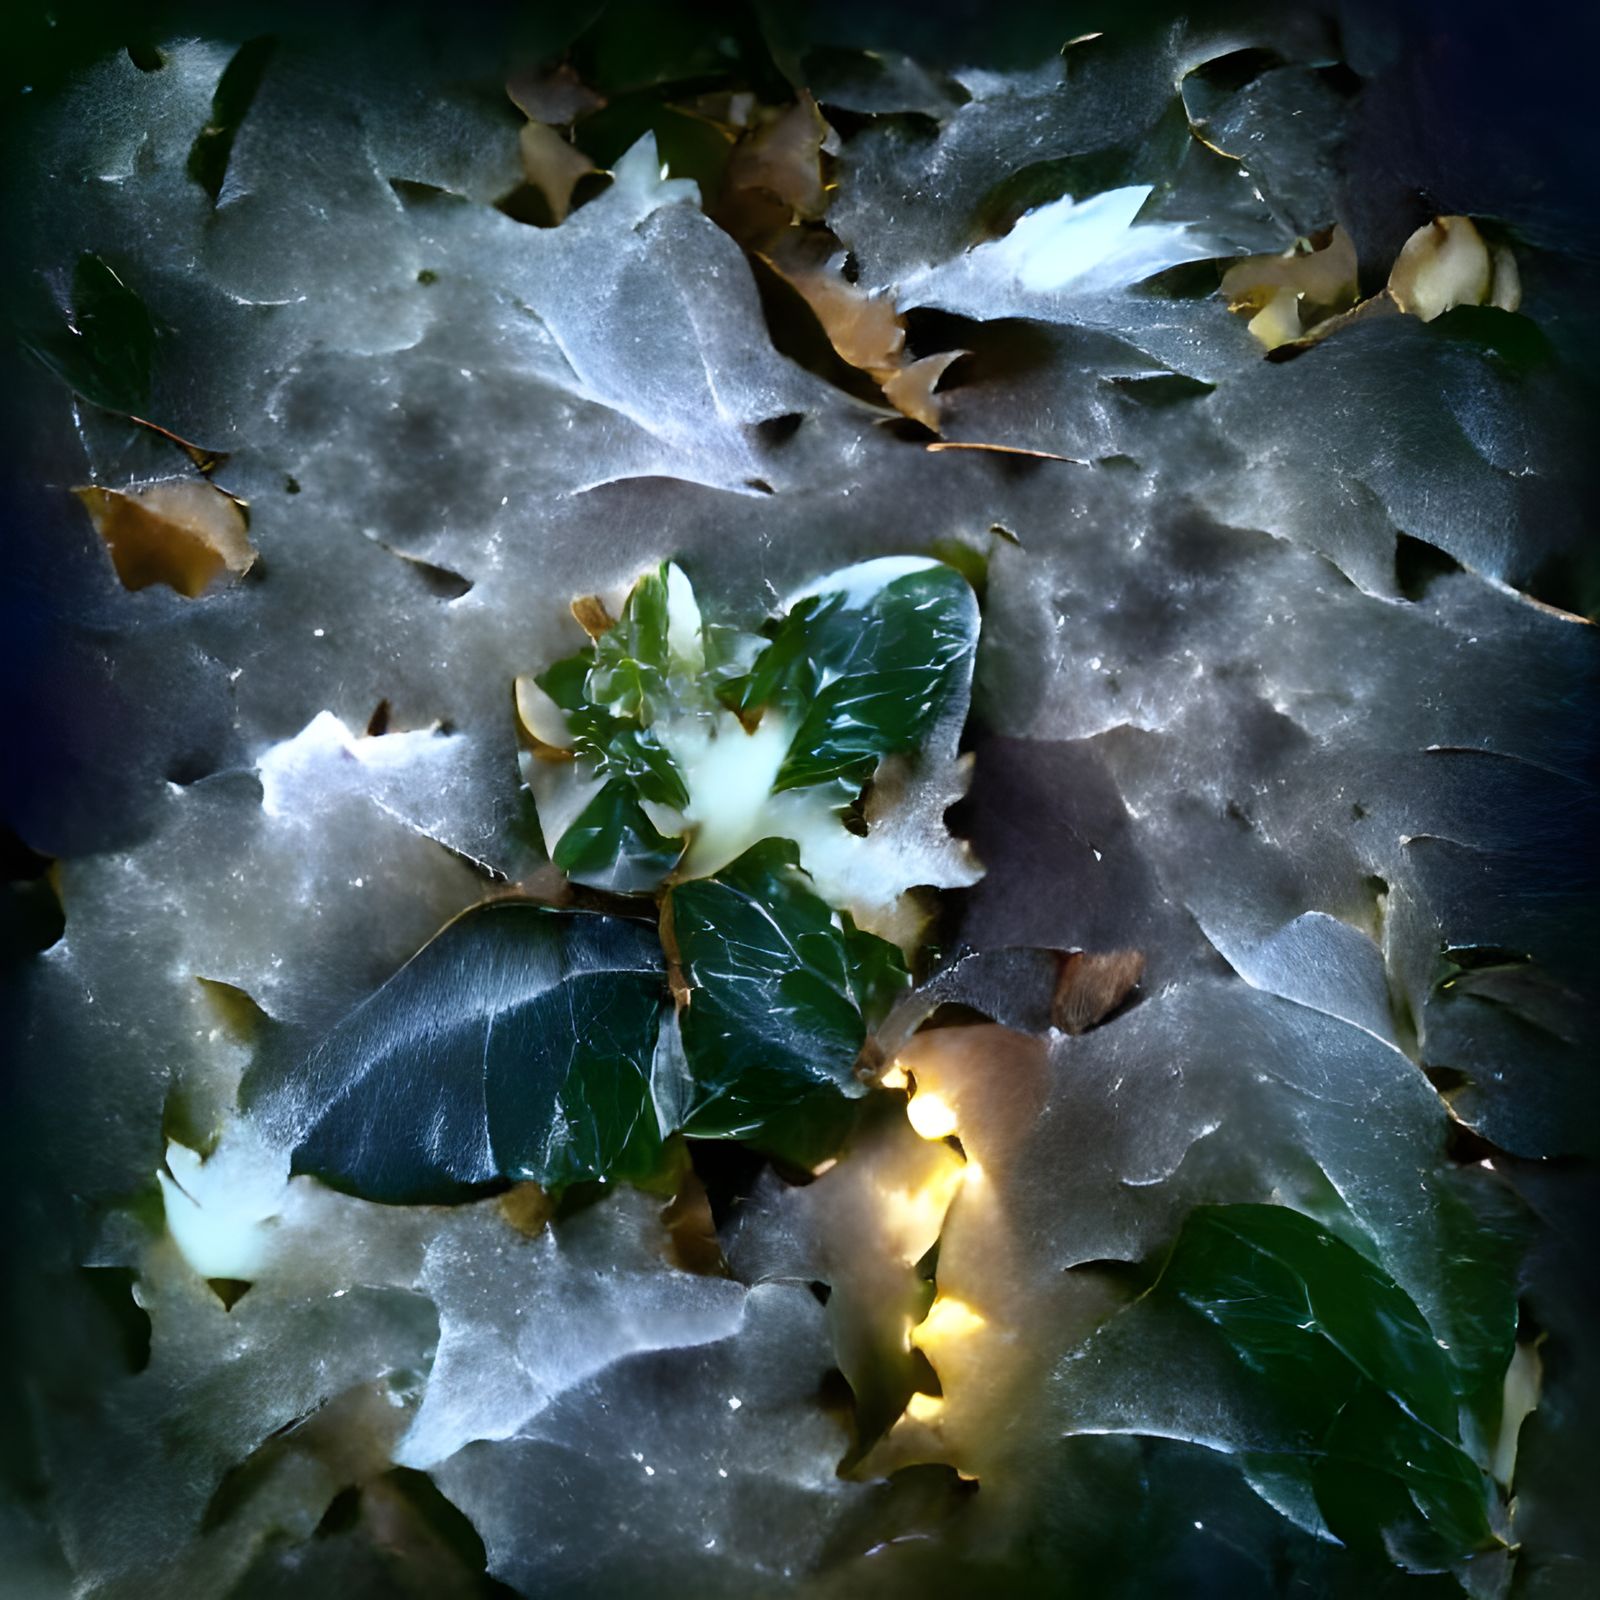 Icy leaves, frozen breath, holly illuminated in the moonlight, with crunchy snow underfoot? Winter is here.